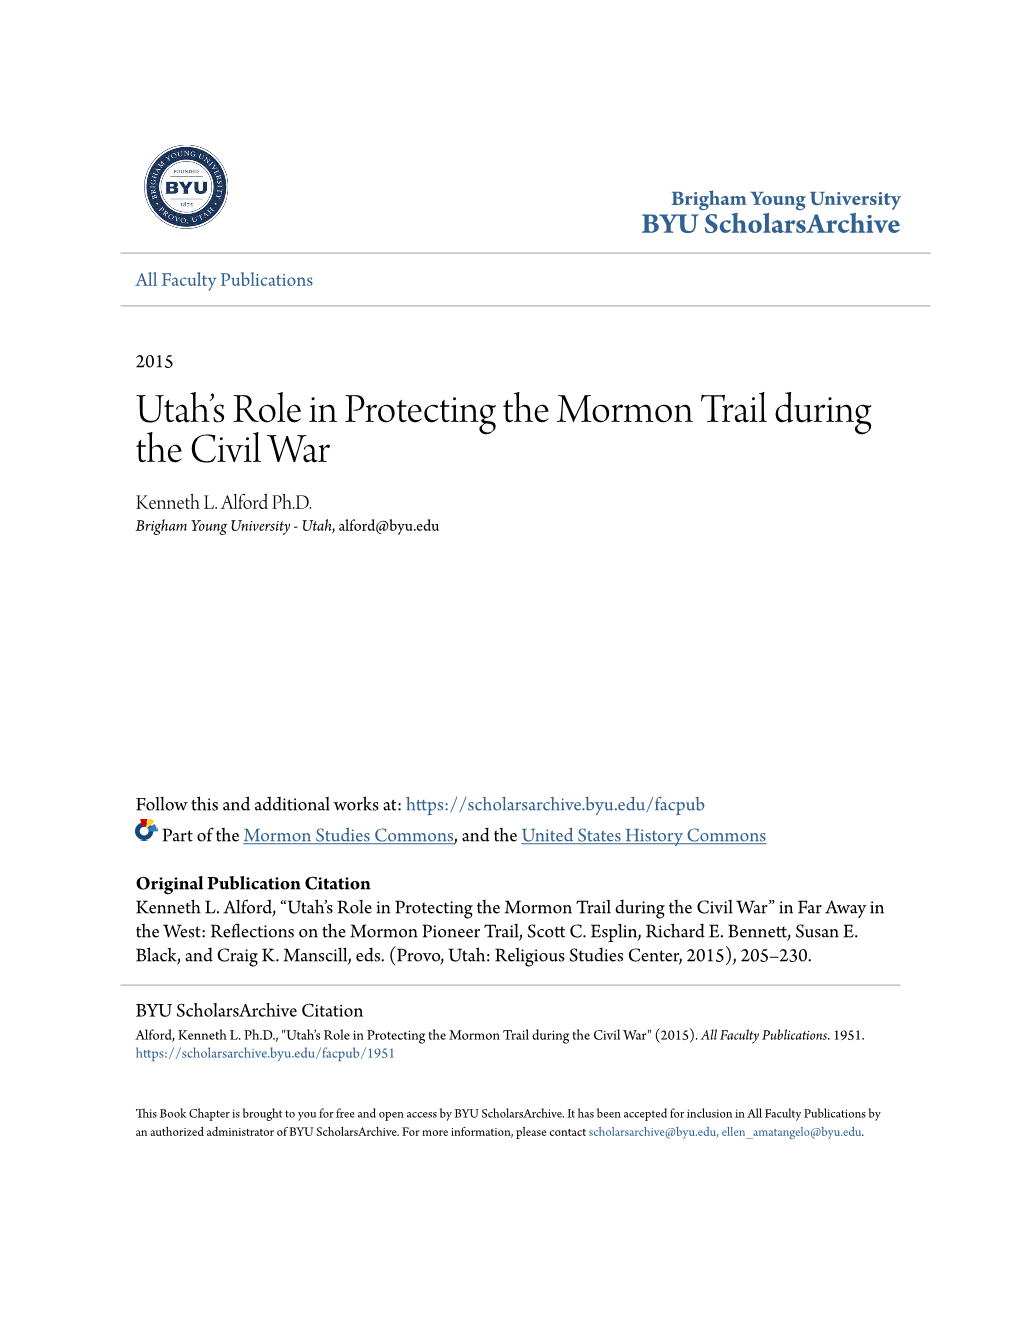 Utah's Role in Protecting the Mormon Trail During the Civil